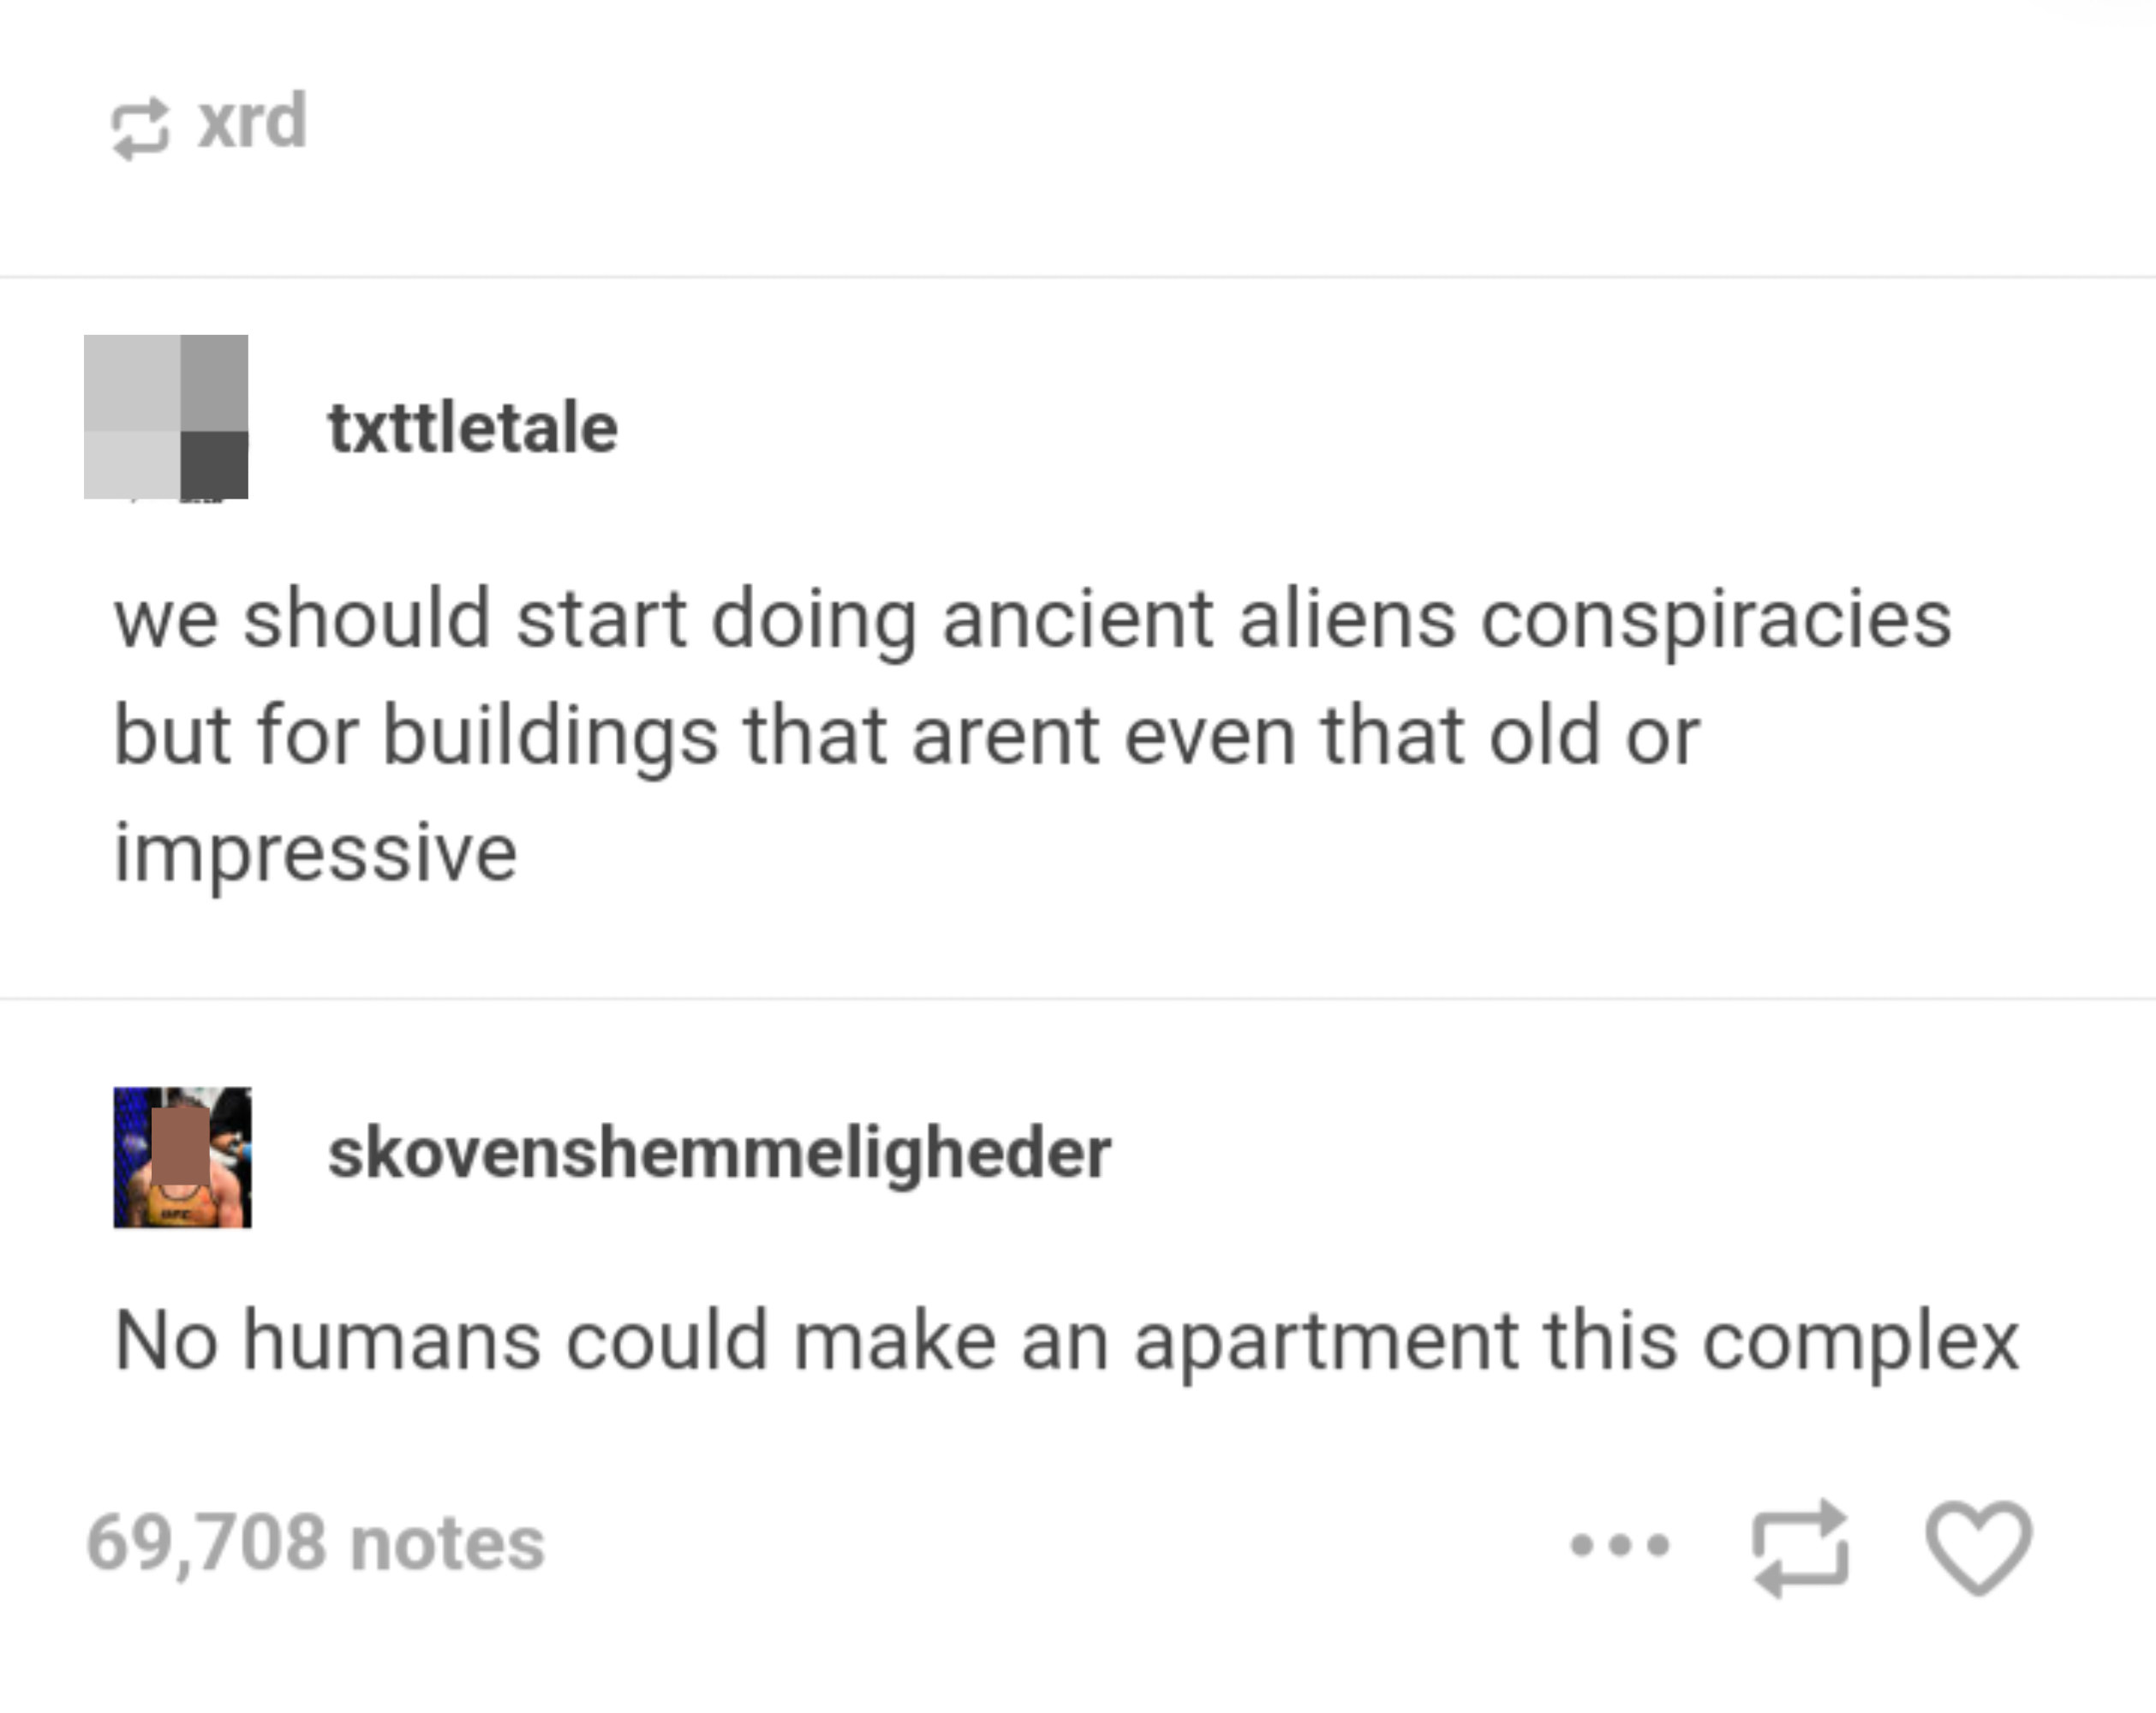 &quot;We should start doing ancient aliens conspiracies but for buildings that aren&#x27;t even that old or impressive&quot; and &quot;No humans could make an apartment this complex&quot;